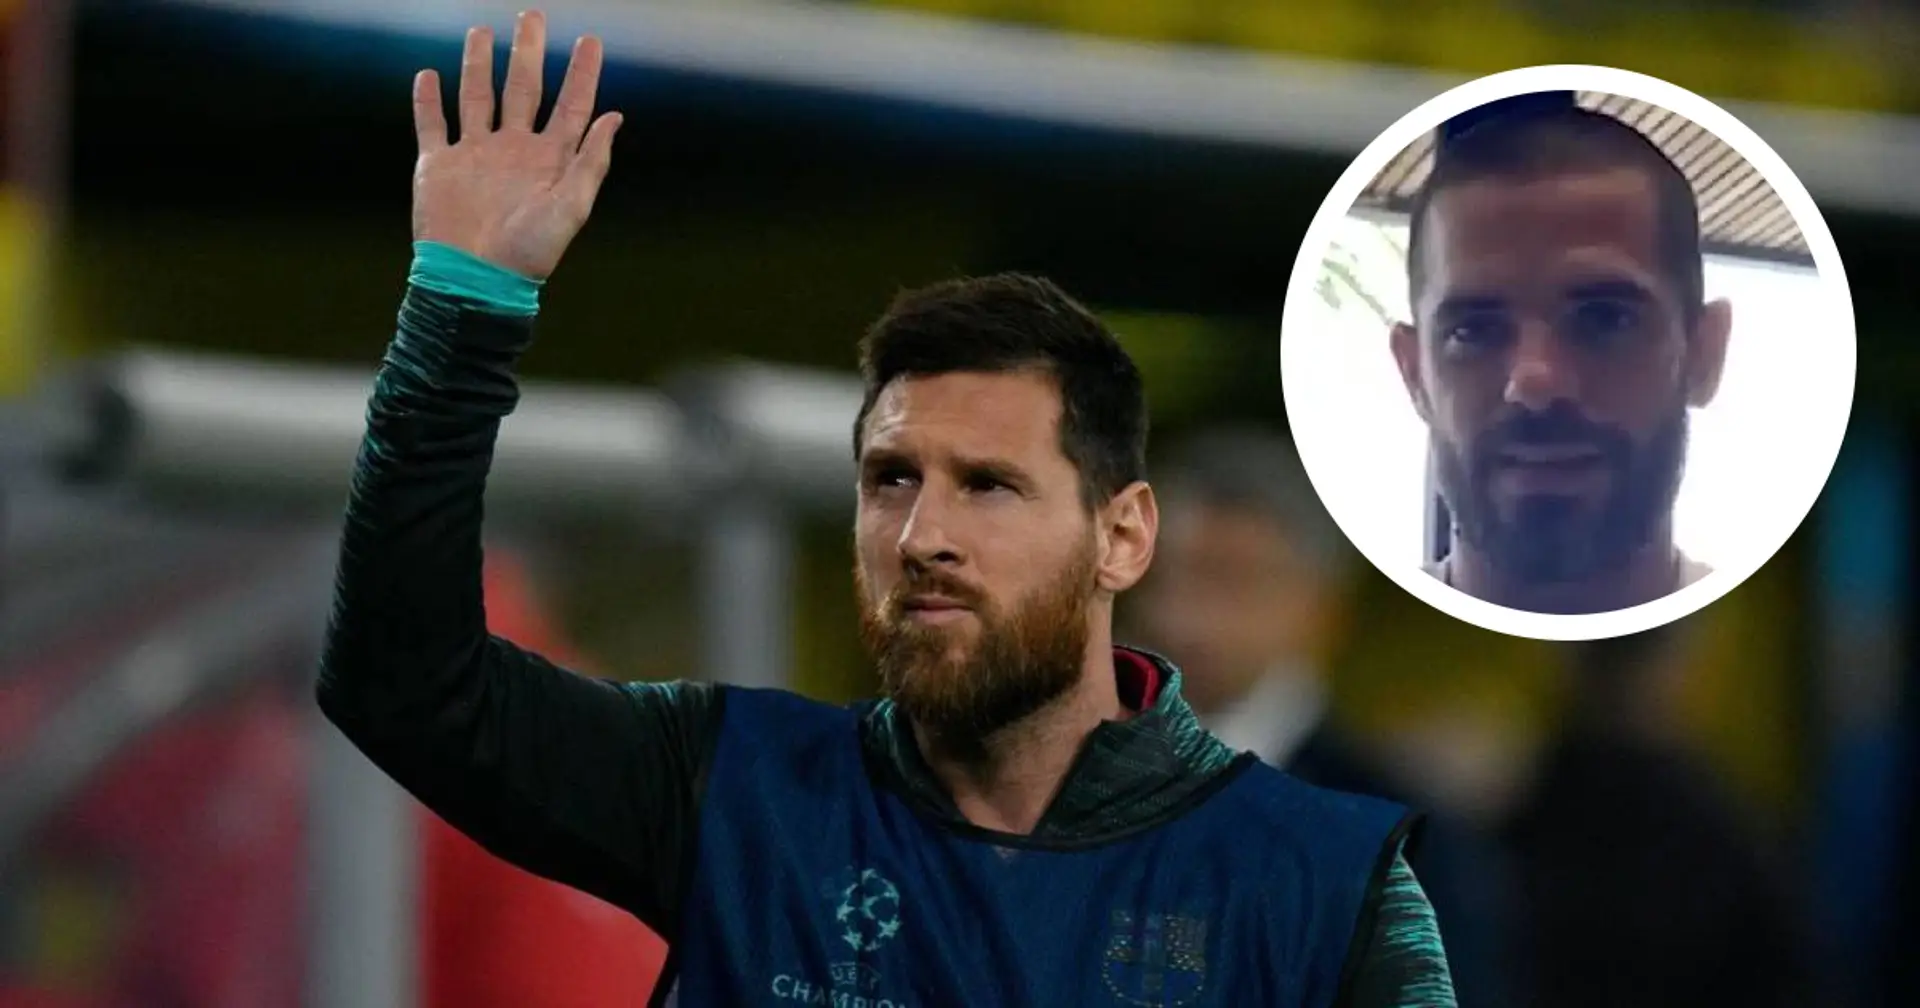 'He can do what he wants, when he wants and how he wants': fellow Argentinian Gago on Messi's future